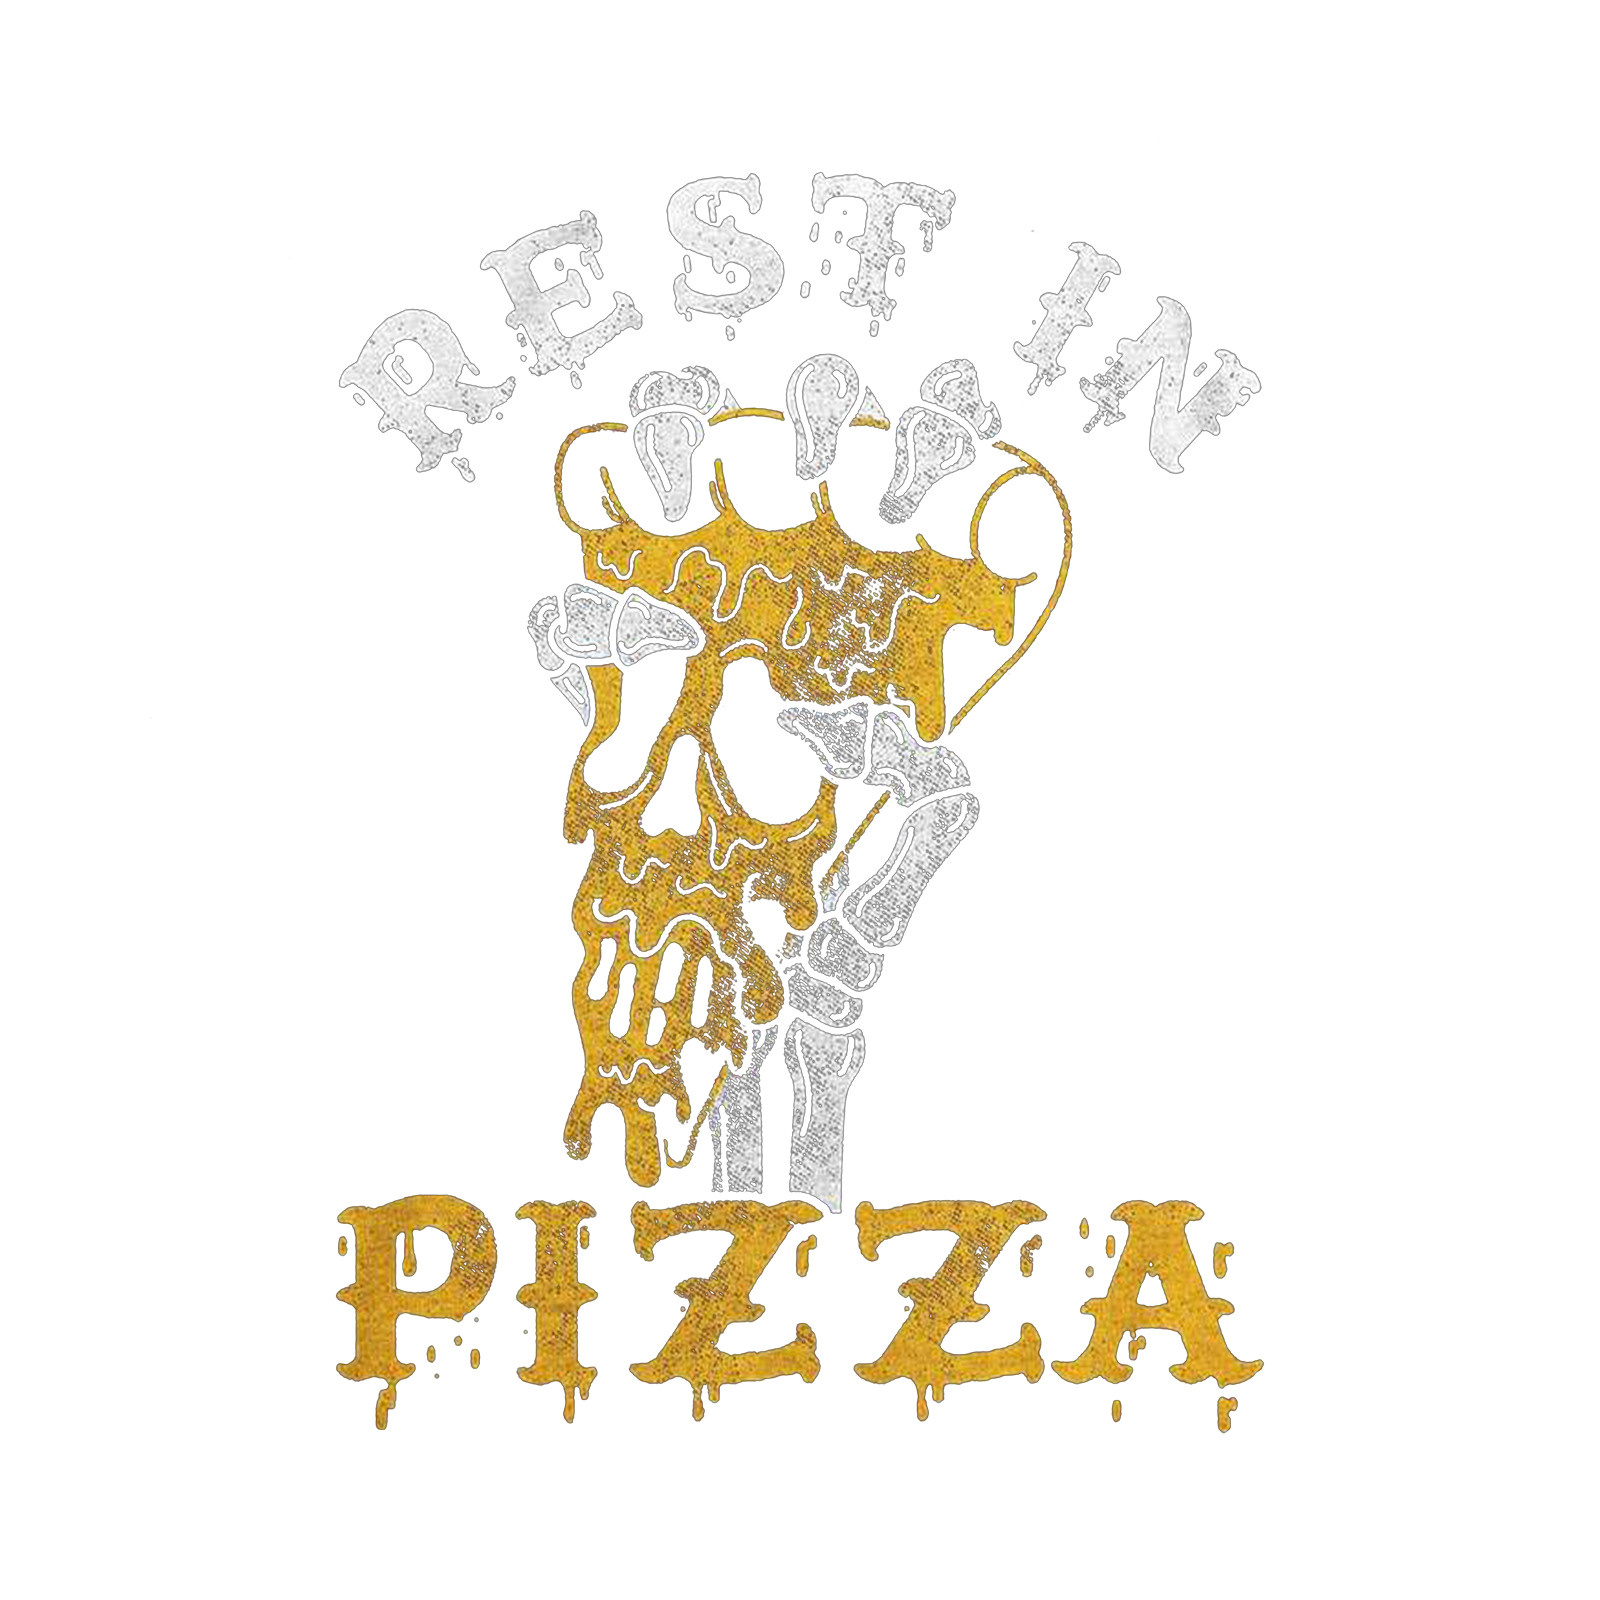 Cloeinc Rest In Pizza Printing Casual T-Shirt - chicyea